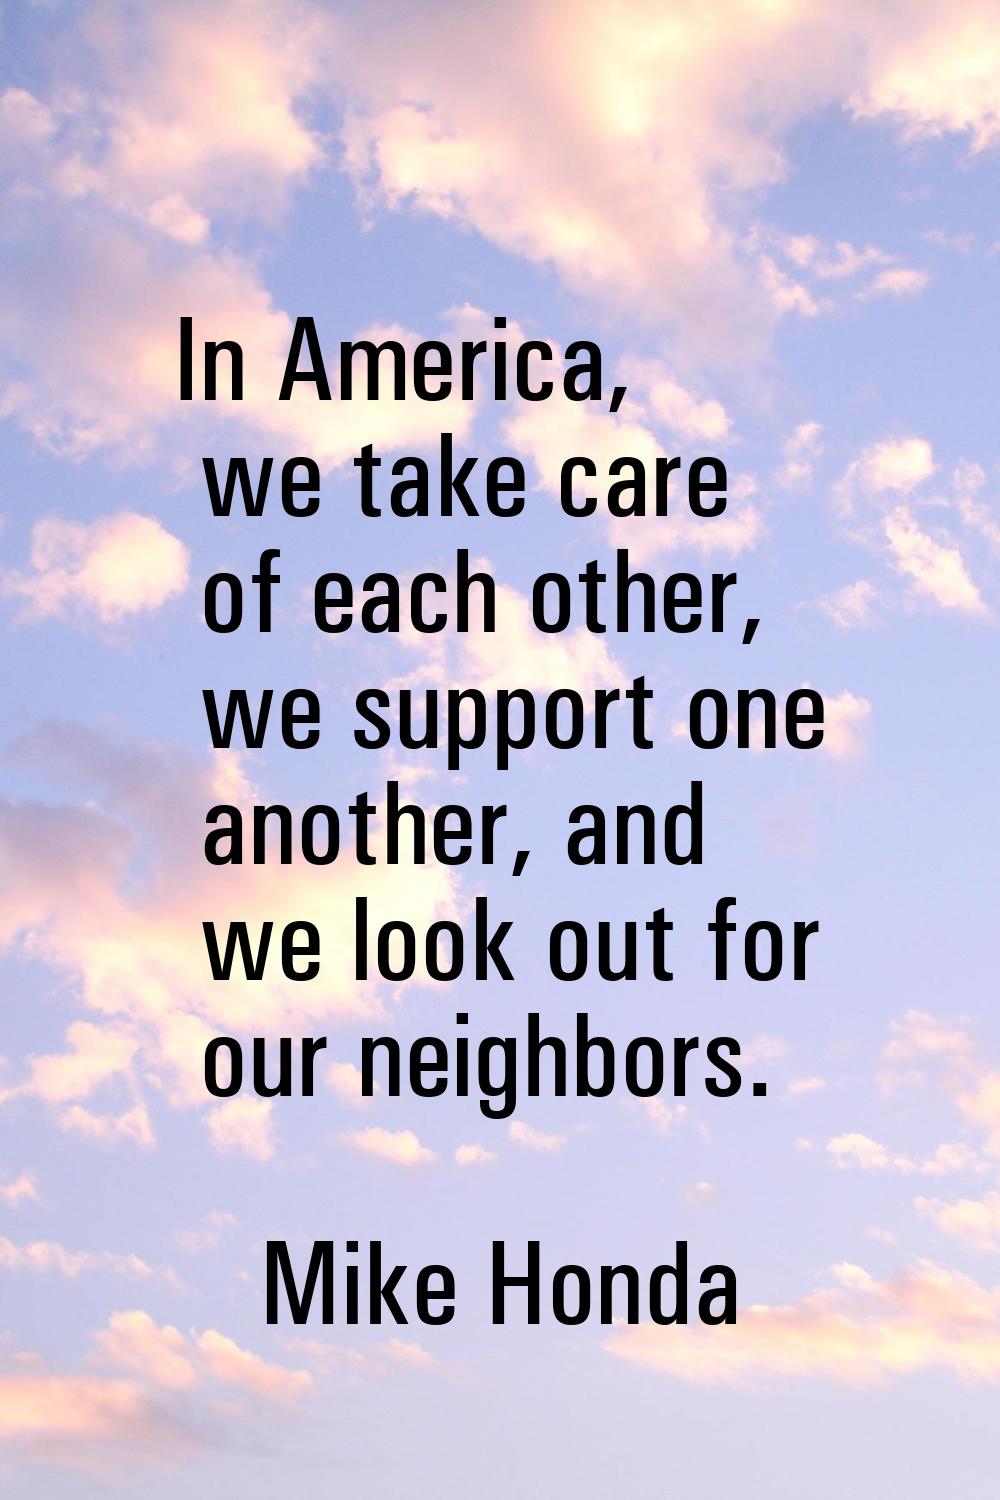 In America, we take care of each other, we support one another, and we look out for our neighbors.